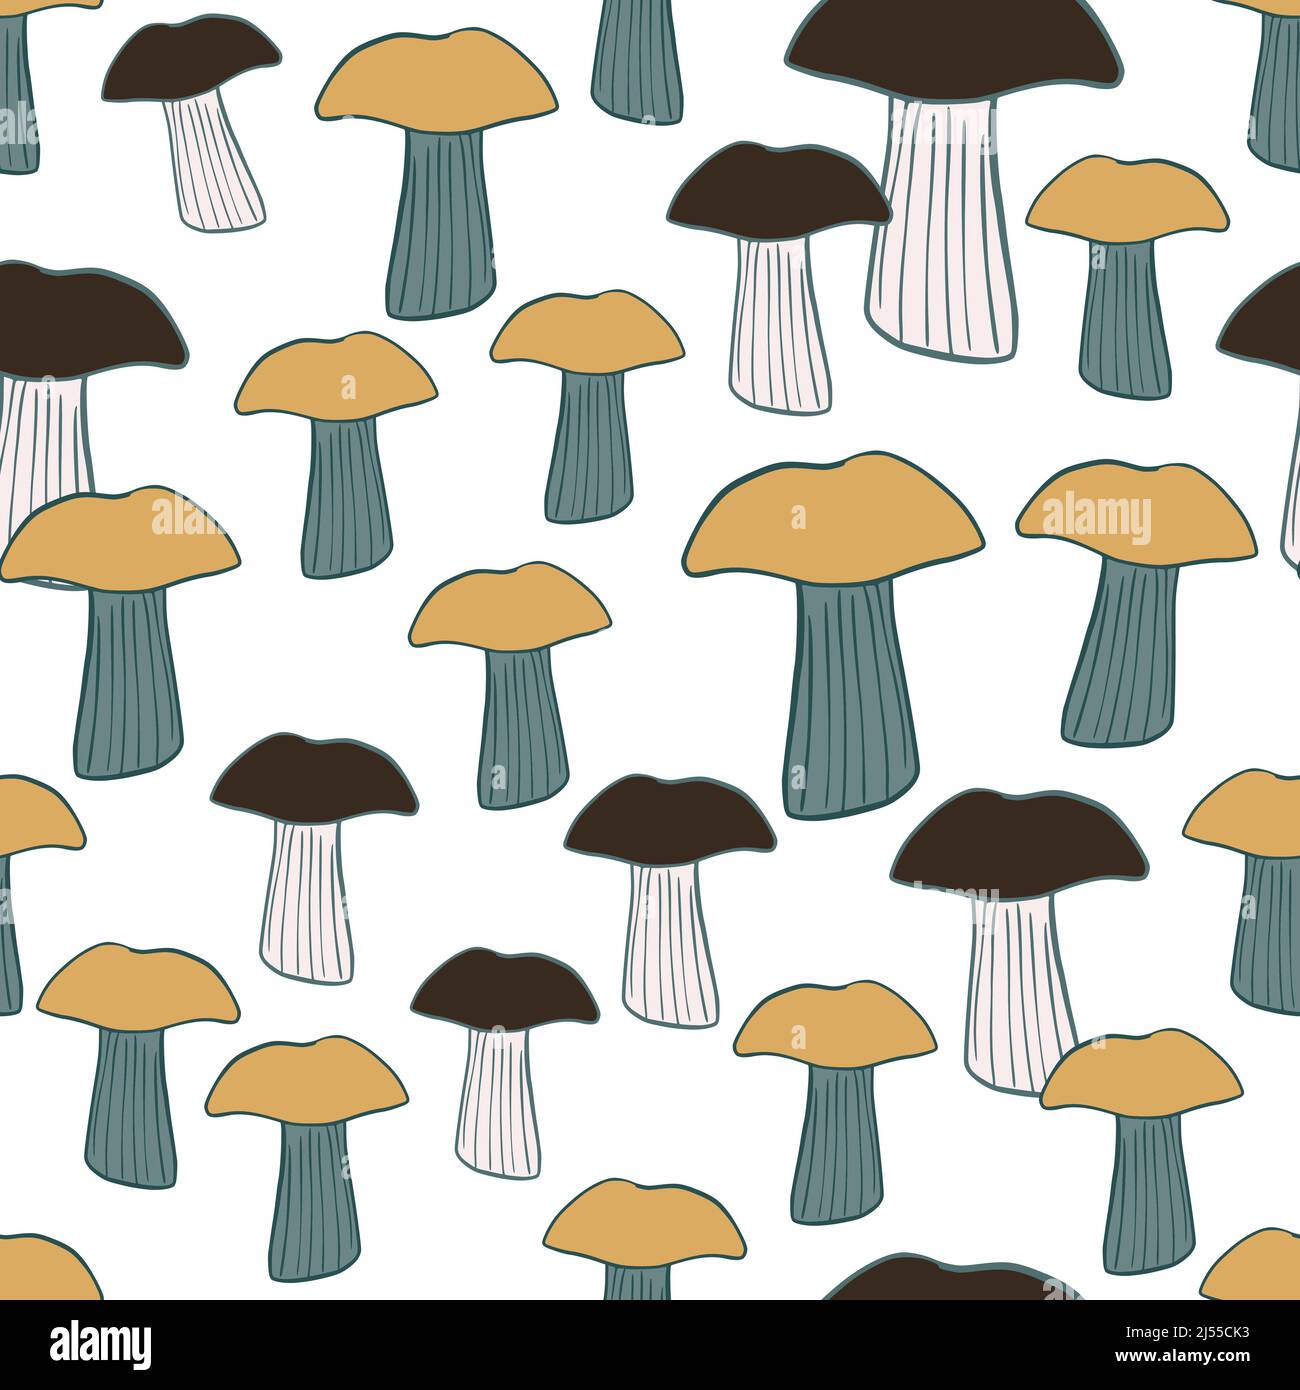 Seamless pattern with mushrooms. Background of forest autumn vegetable in doodle style. Repeated design texture for printing, fabric, wrapping, wallpa Stock Vector